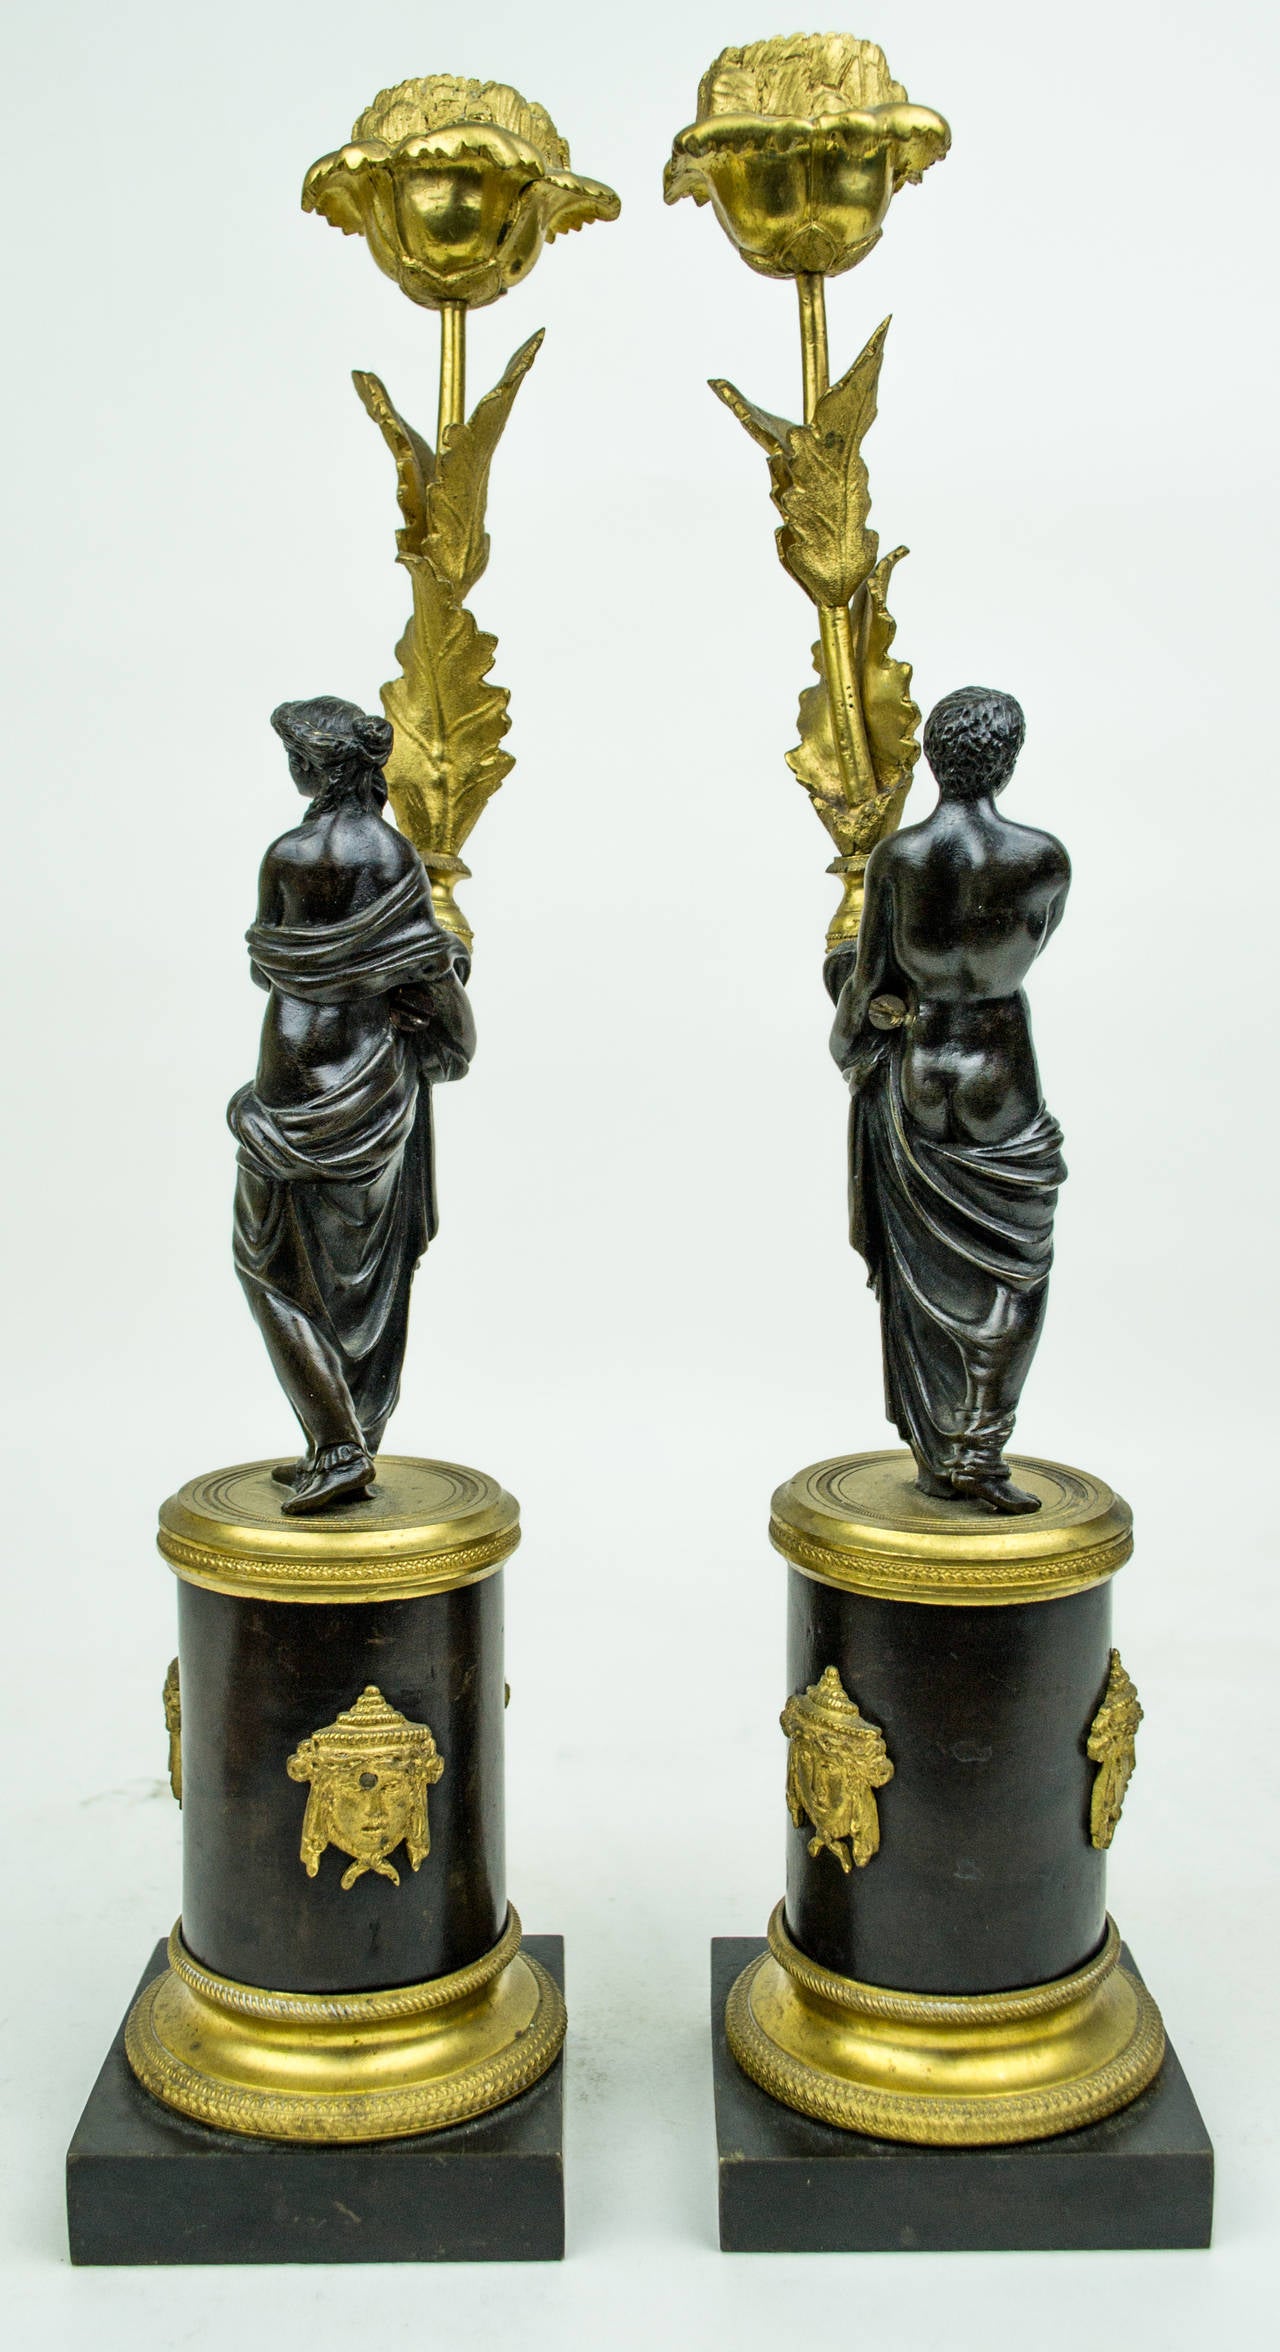 Pair of French Gilt and Patinated Bronze Figural Candlesticks
Stock Number: DA94